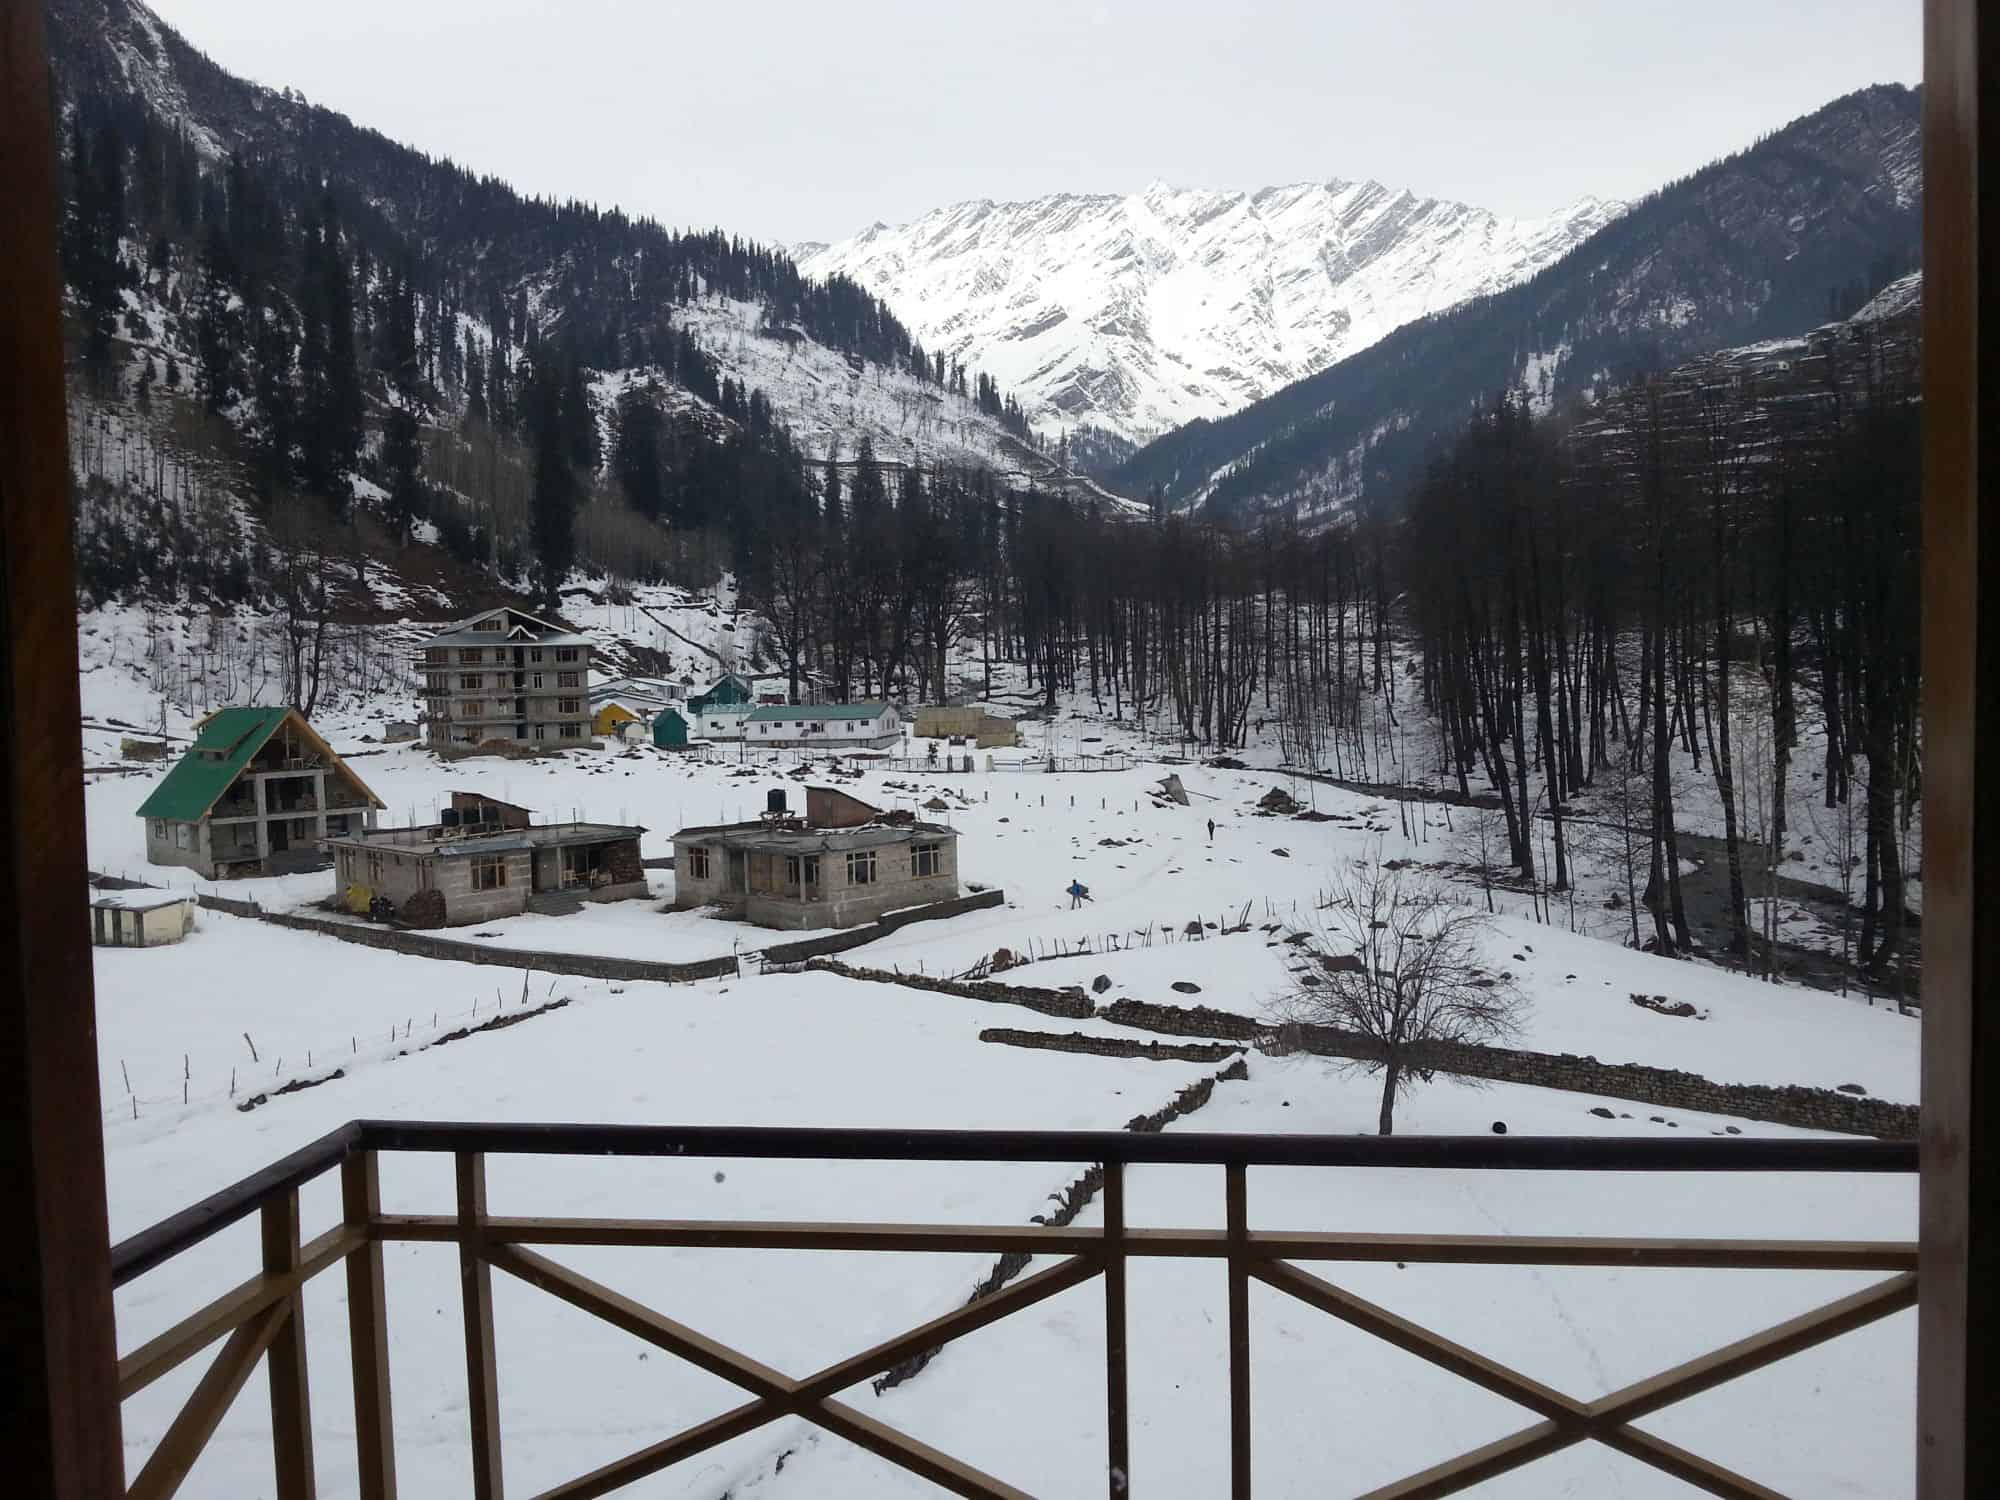 View from hotel room's balcony in Solang Valley